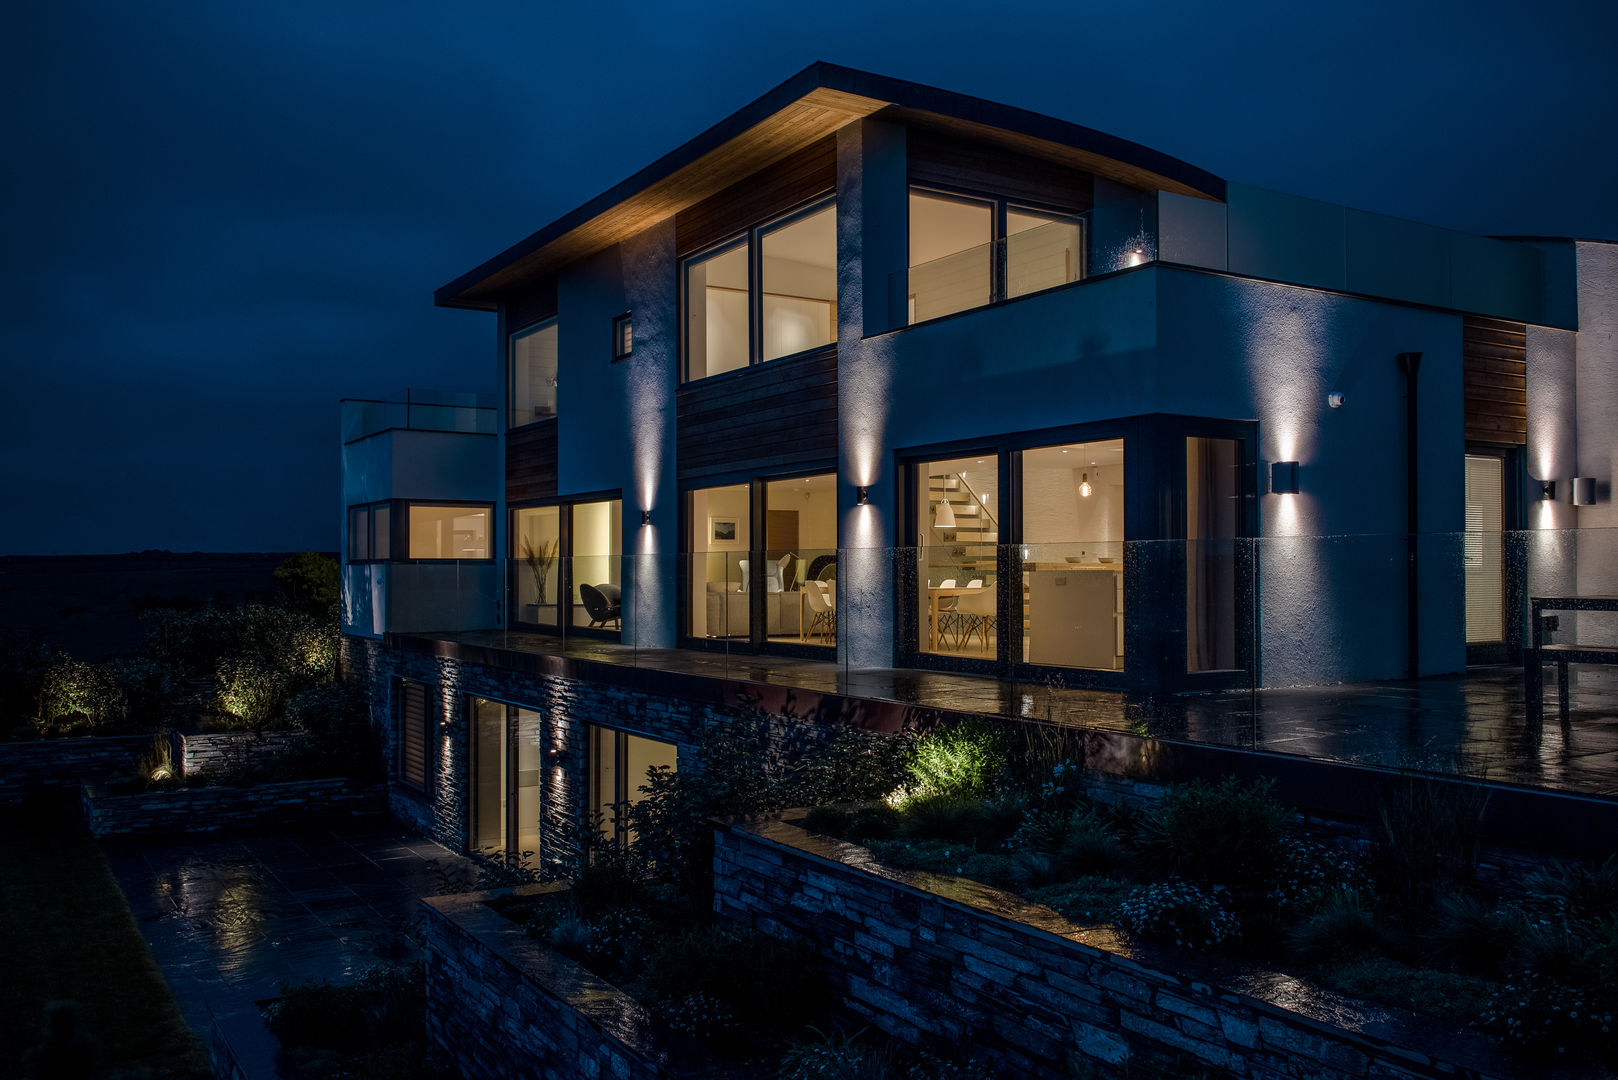 New Contemporary House, Polzeath, Cornwall Arco2 Architecture Ltd Case moderne Architects Cornwall, architecture Cornwall, arco2 architects, eco friendly architects, sustainable architects, sustainable architecture, architecture by the sea, beach house architecture,